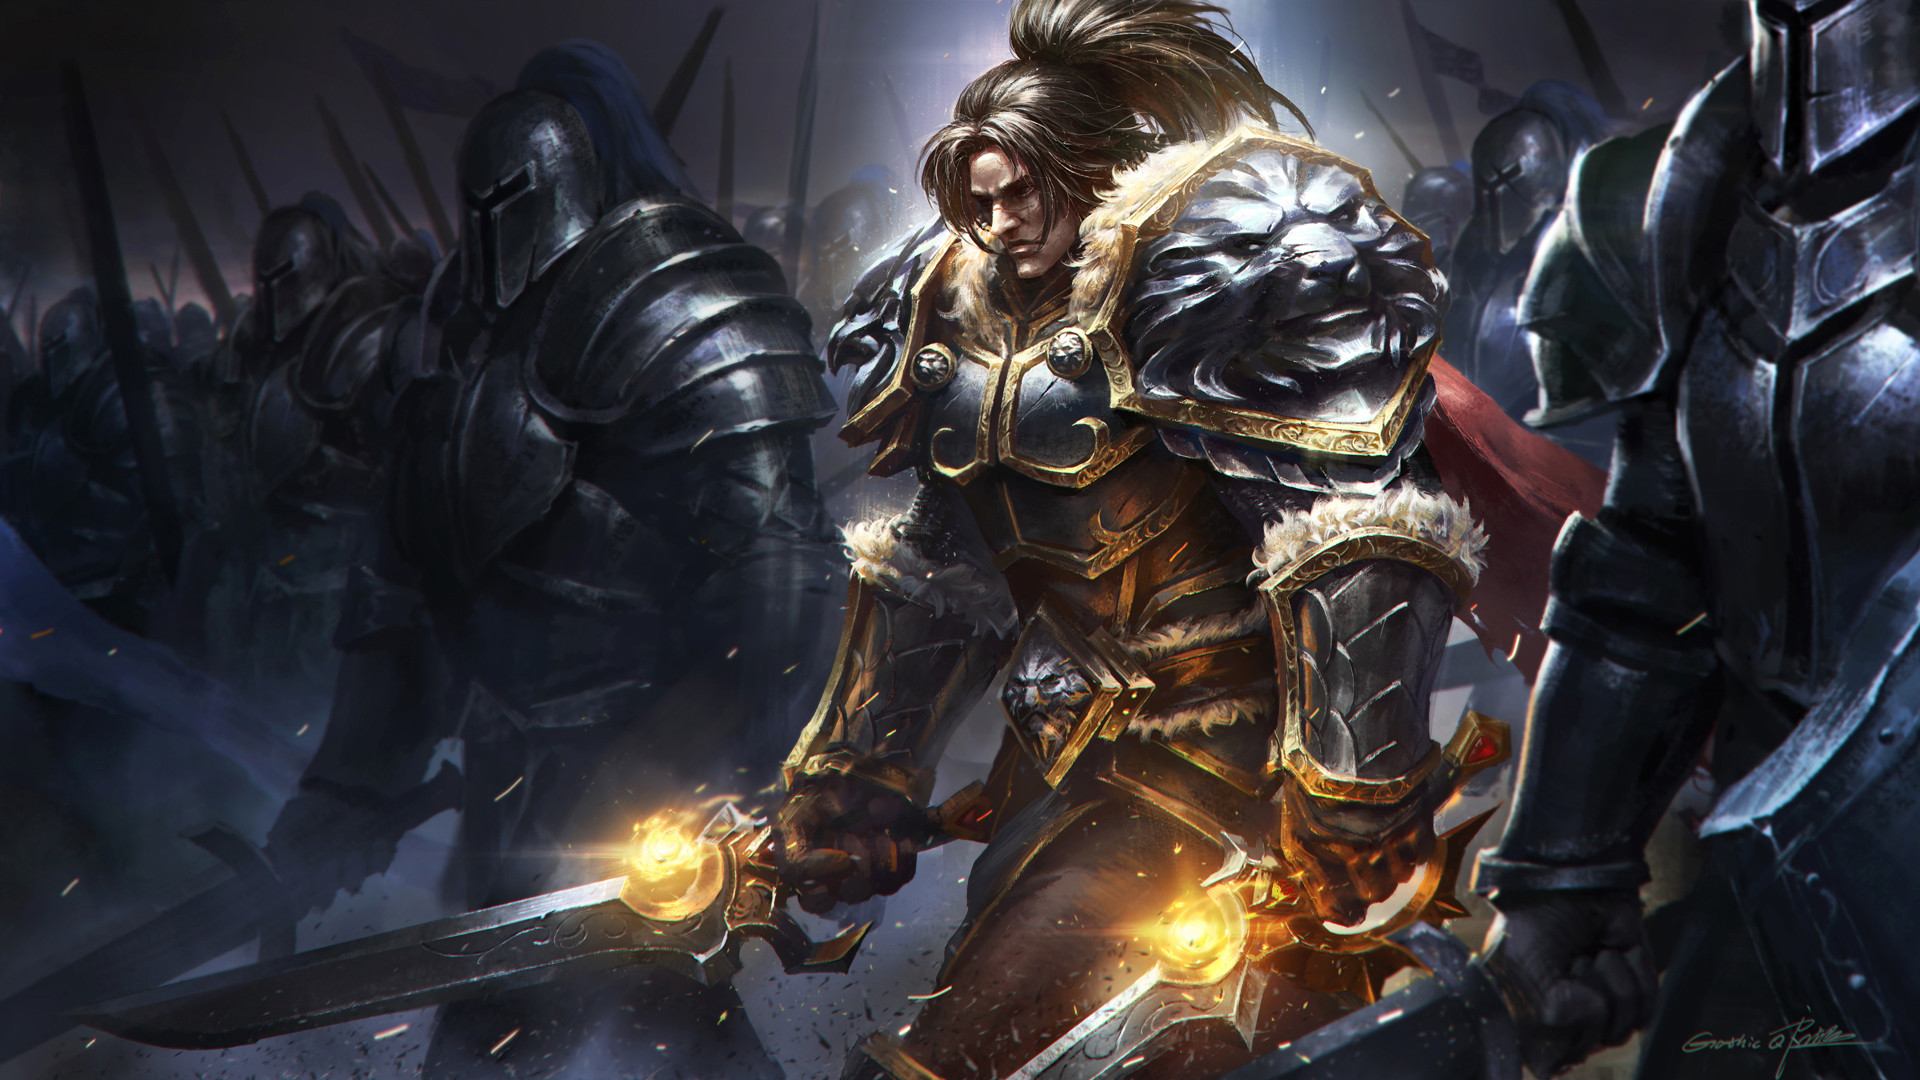 General 1920x1080 artwork Blizzard Entertainment video games Warcraft World of Warcraft King Varian Wrynn army armor ponytail men video game characters